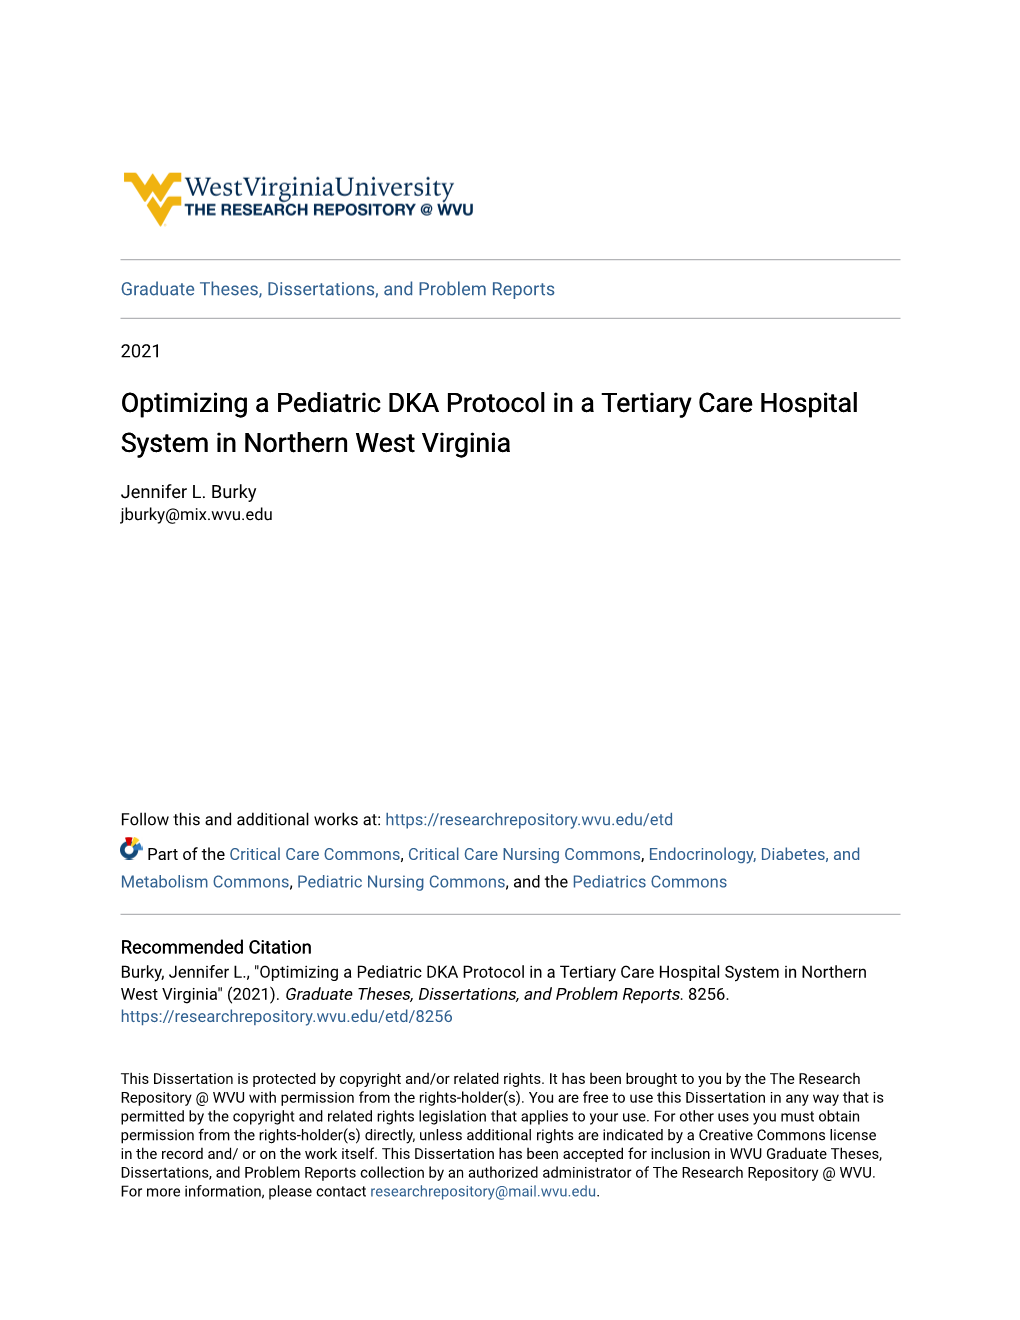 Optimizing a Pediatric DKA Protocol in a Tertiary Care Hospital System in Northern West Virginia